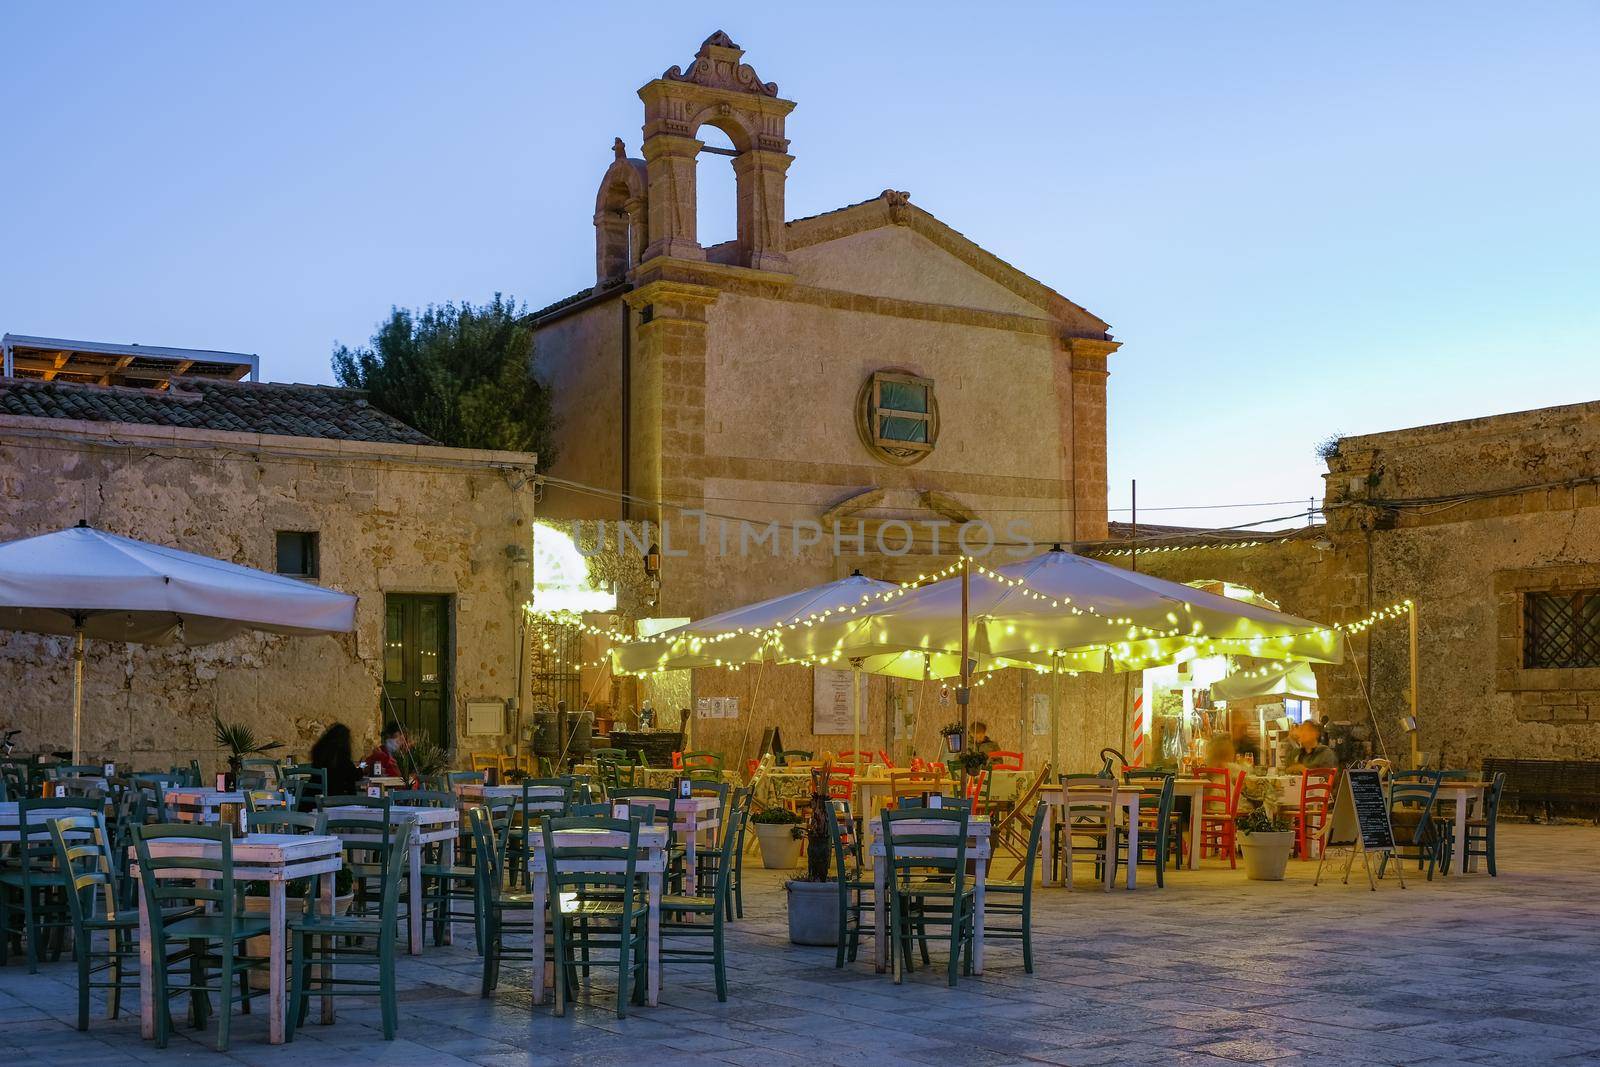 The picturesque village of Marzamemi, in the province of Syracuse, Sicily by fokkebok